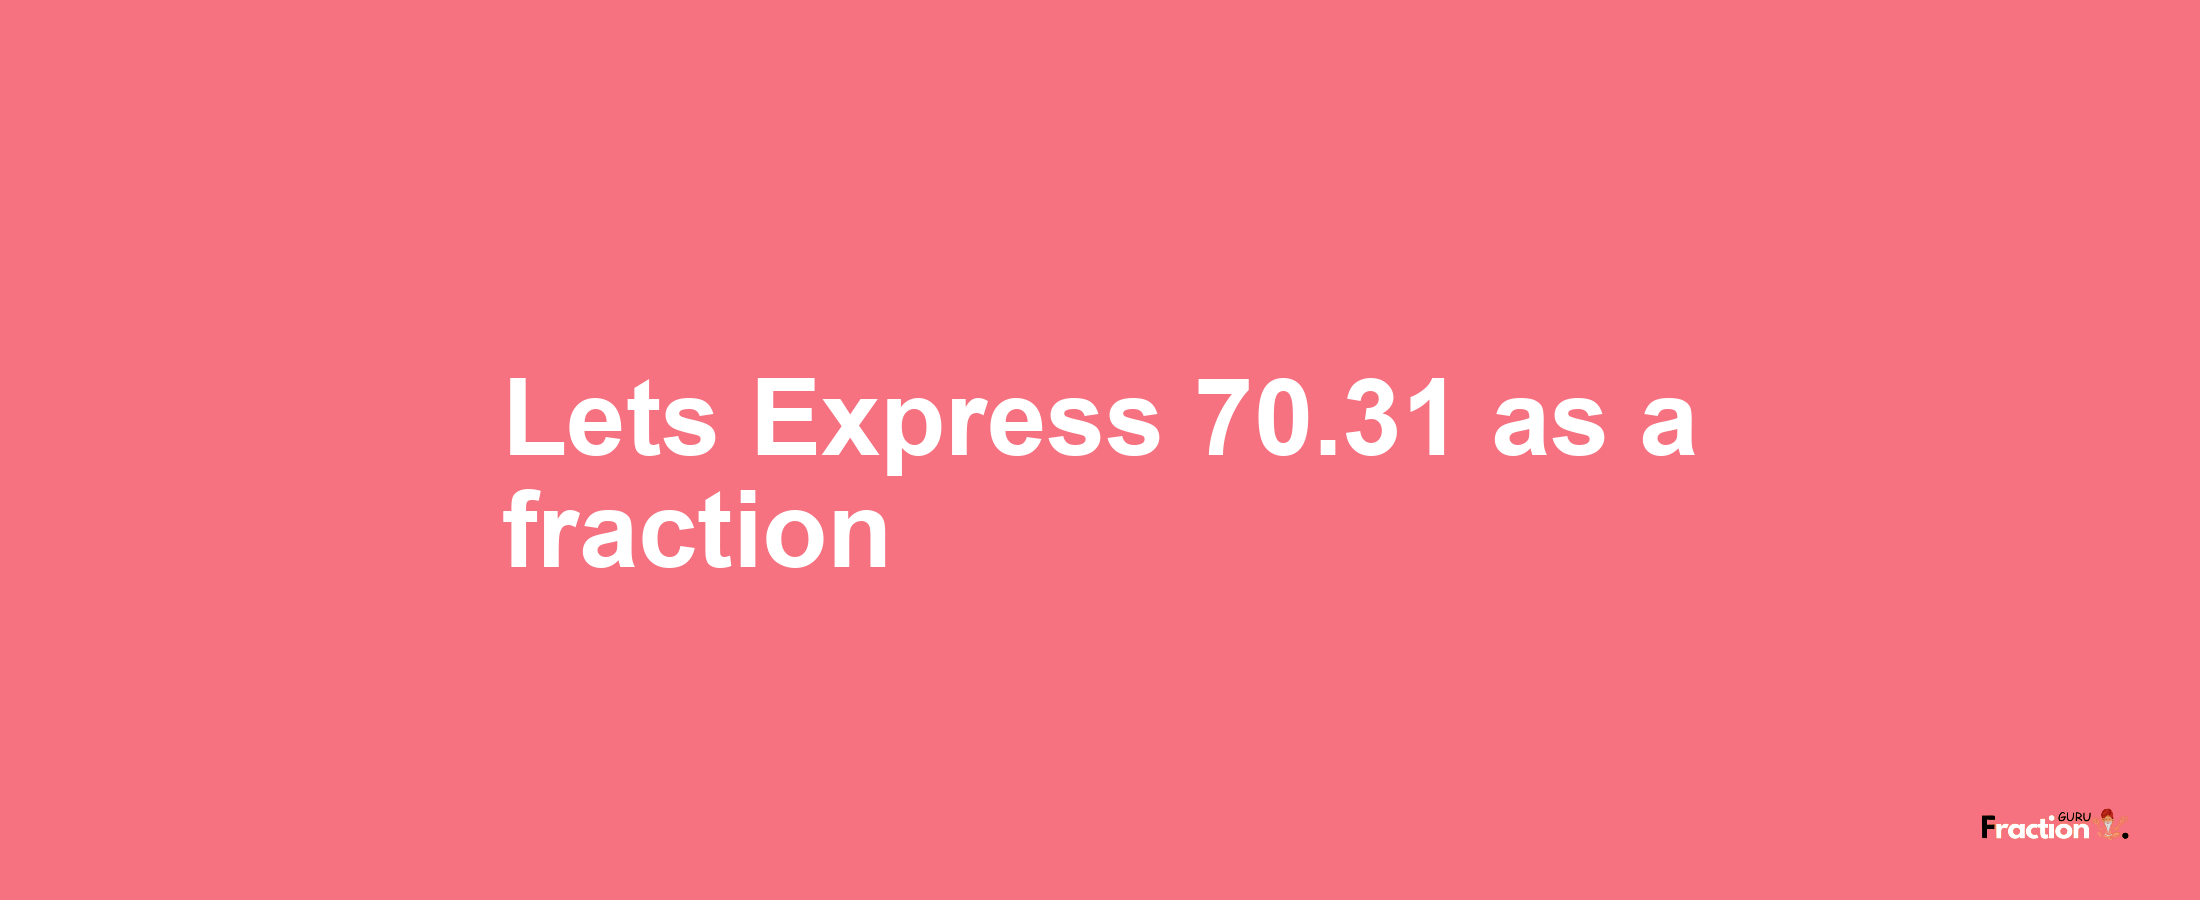 Lets Express 70.31 as afraction